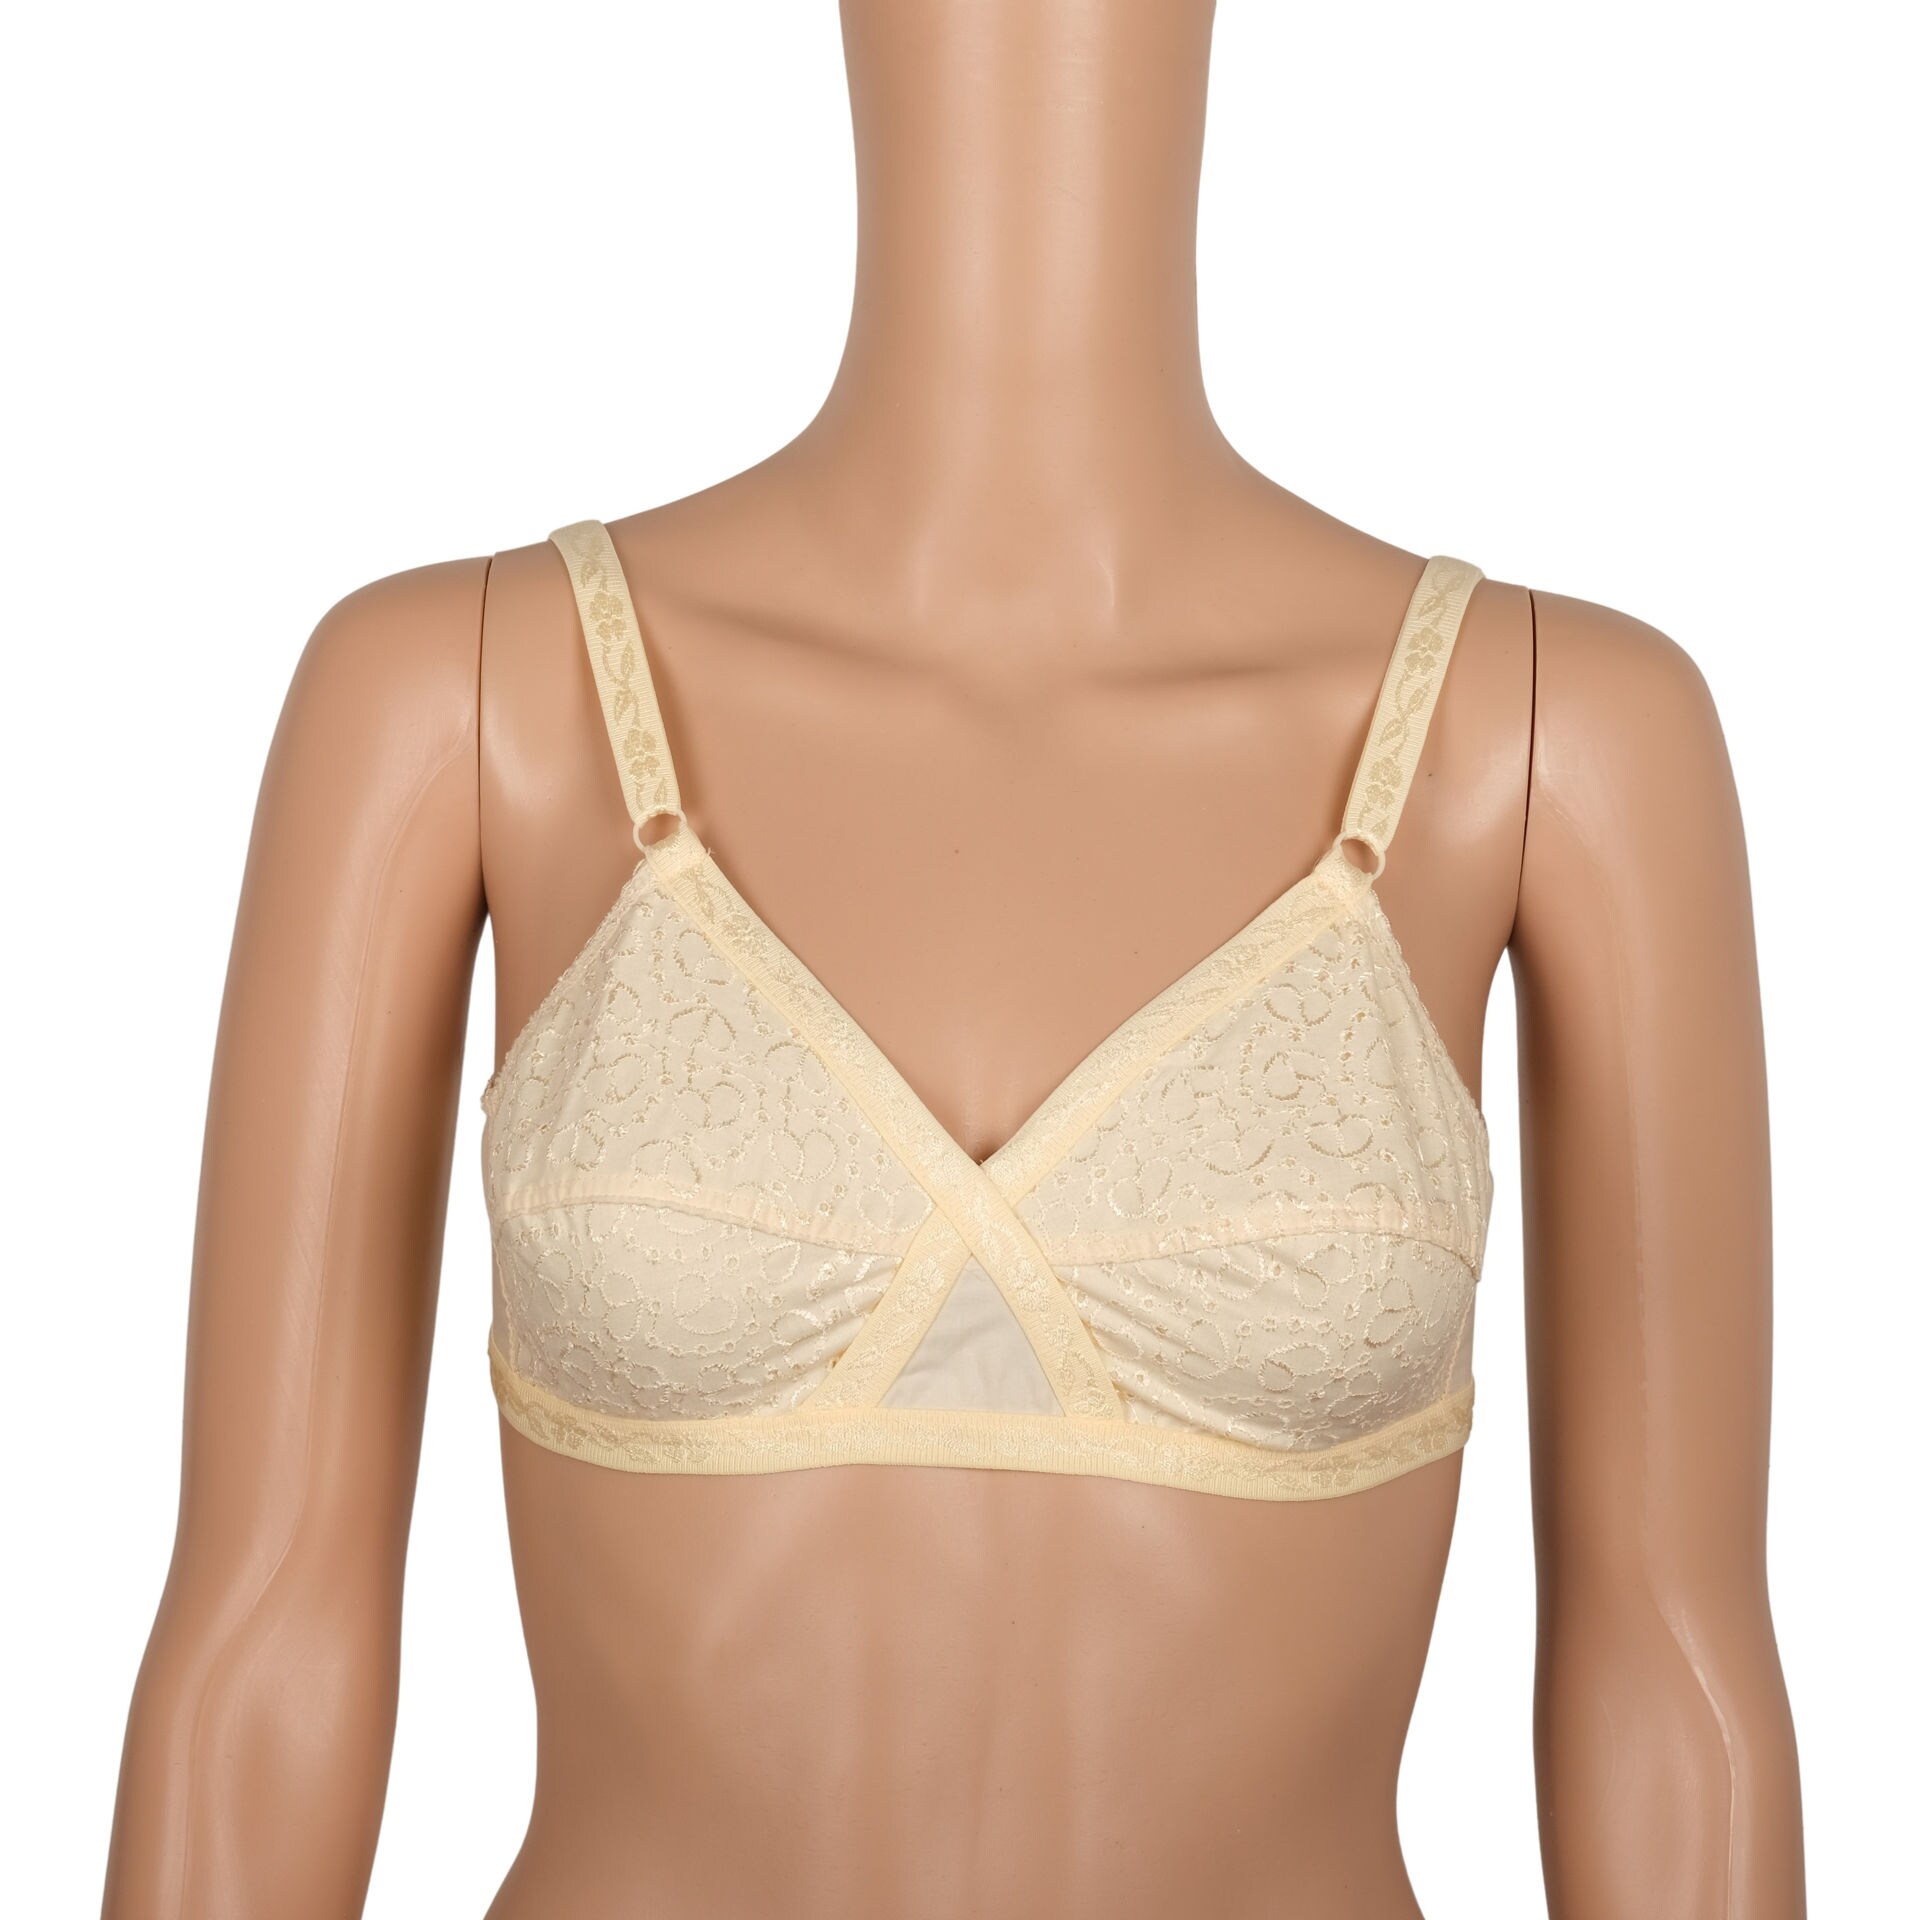 Buy Non-wired padded triangle bra Online in Dubai & the UAE